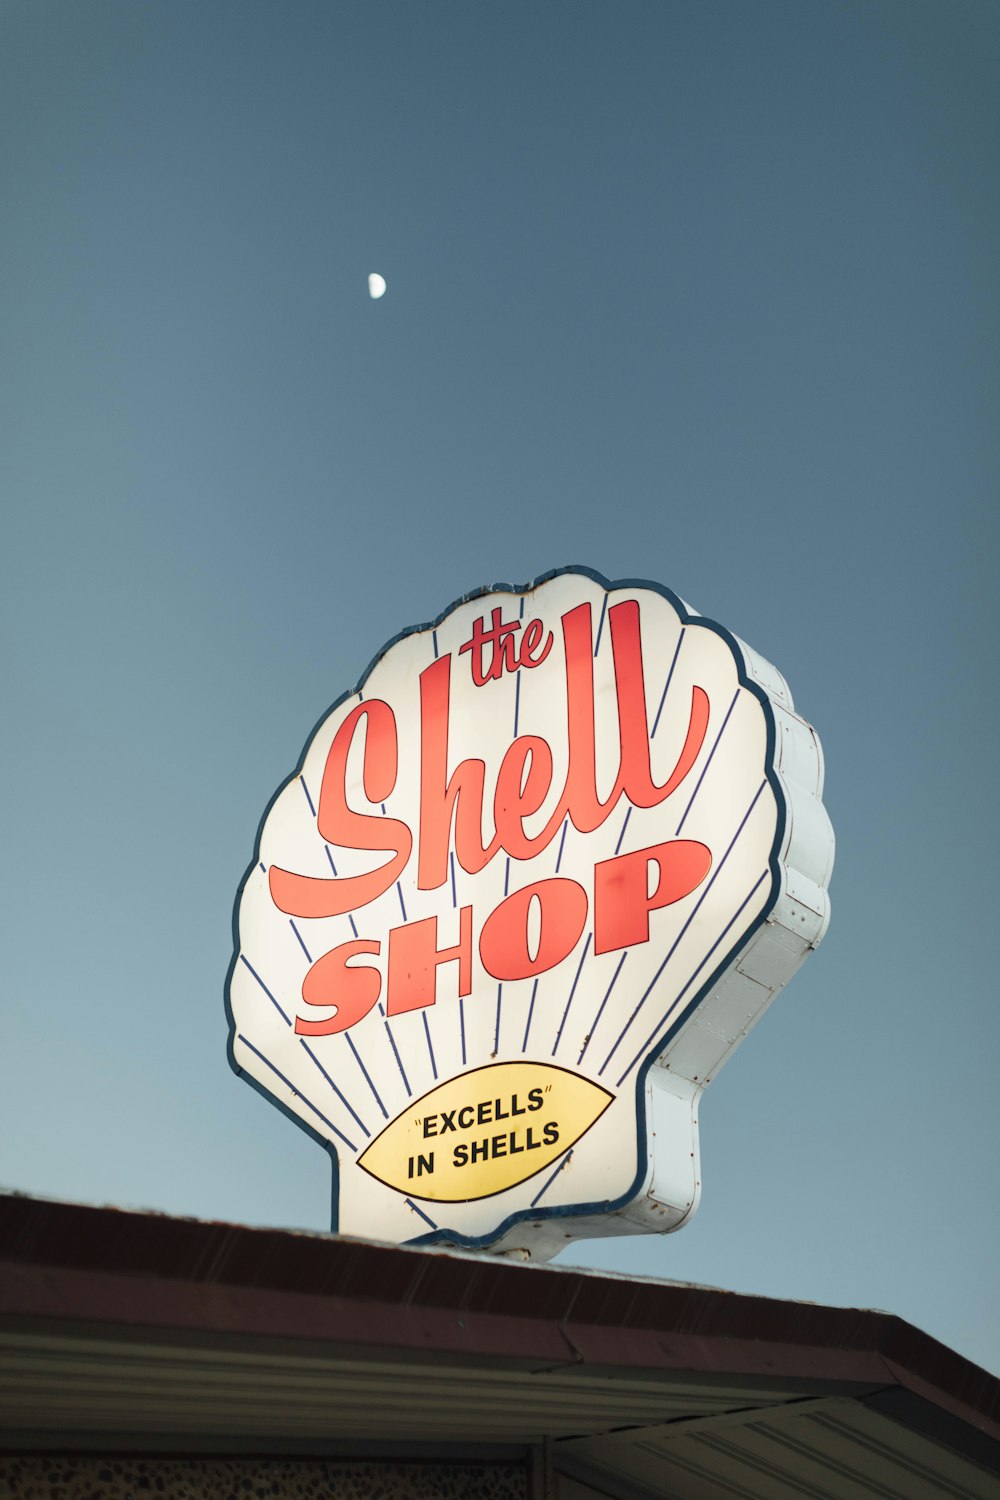 a shell shop sign on top of a building